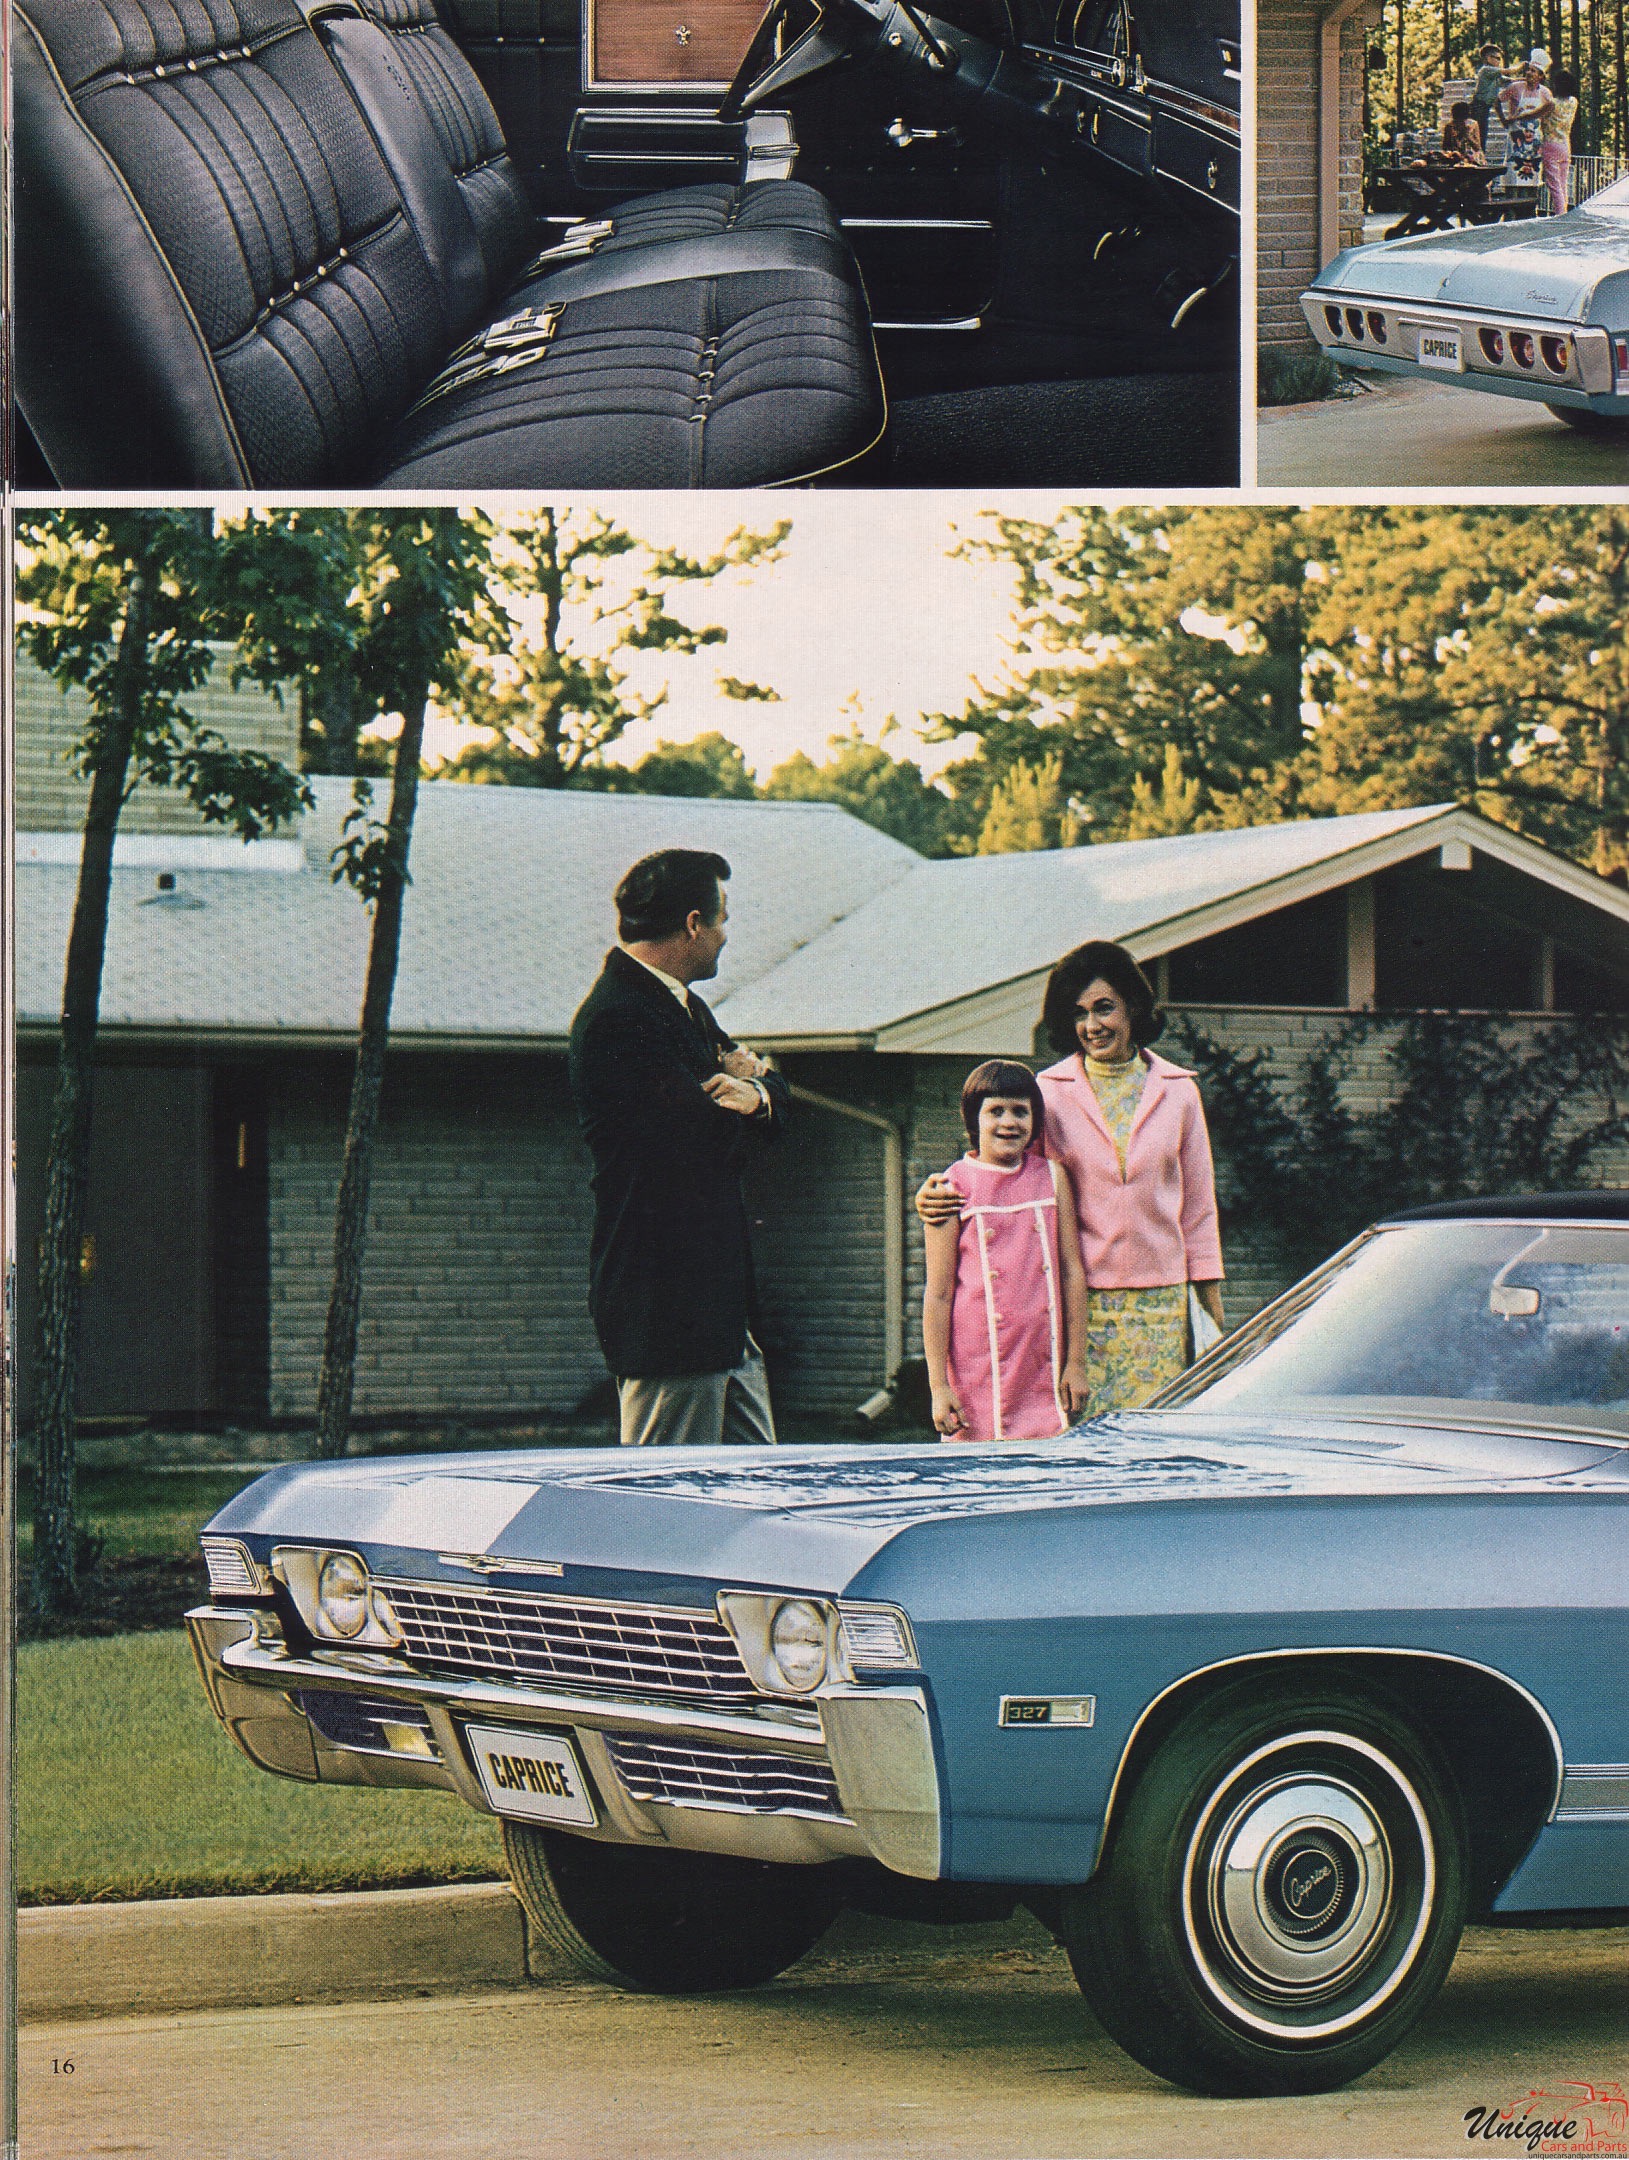 1968 Chevrolet Full-Size Brochure Page 10